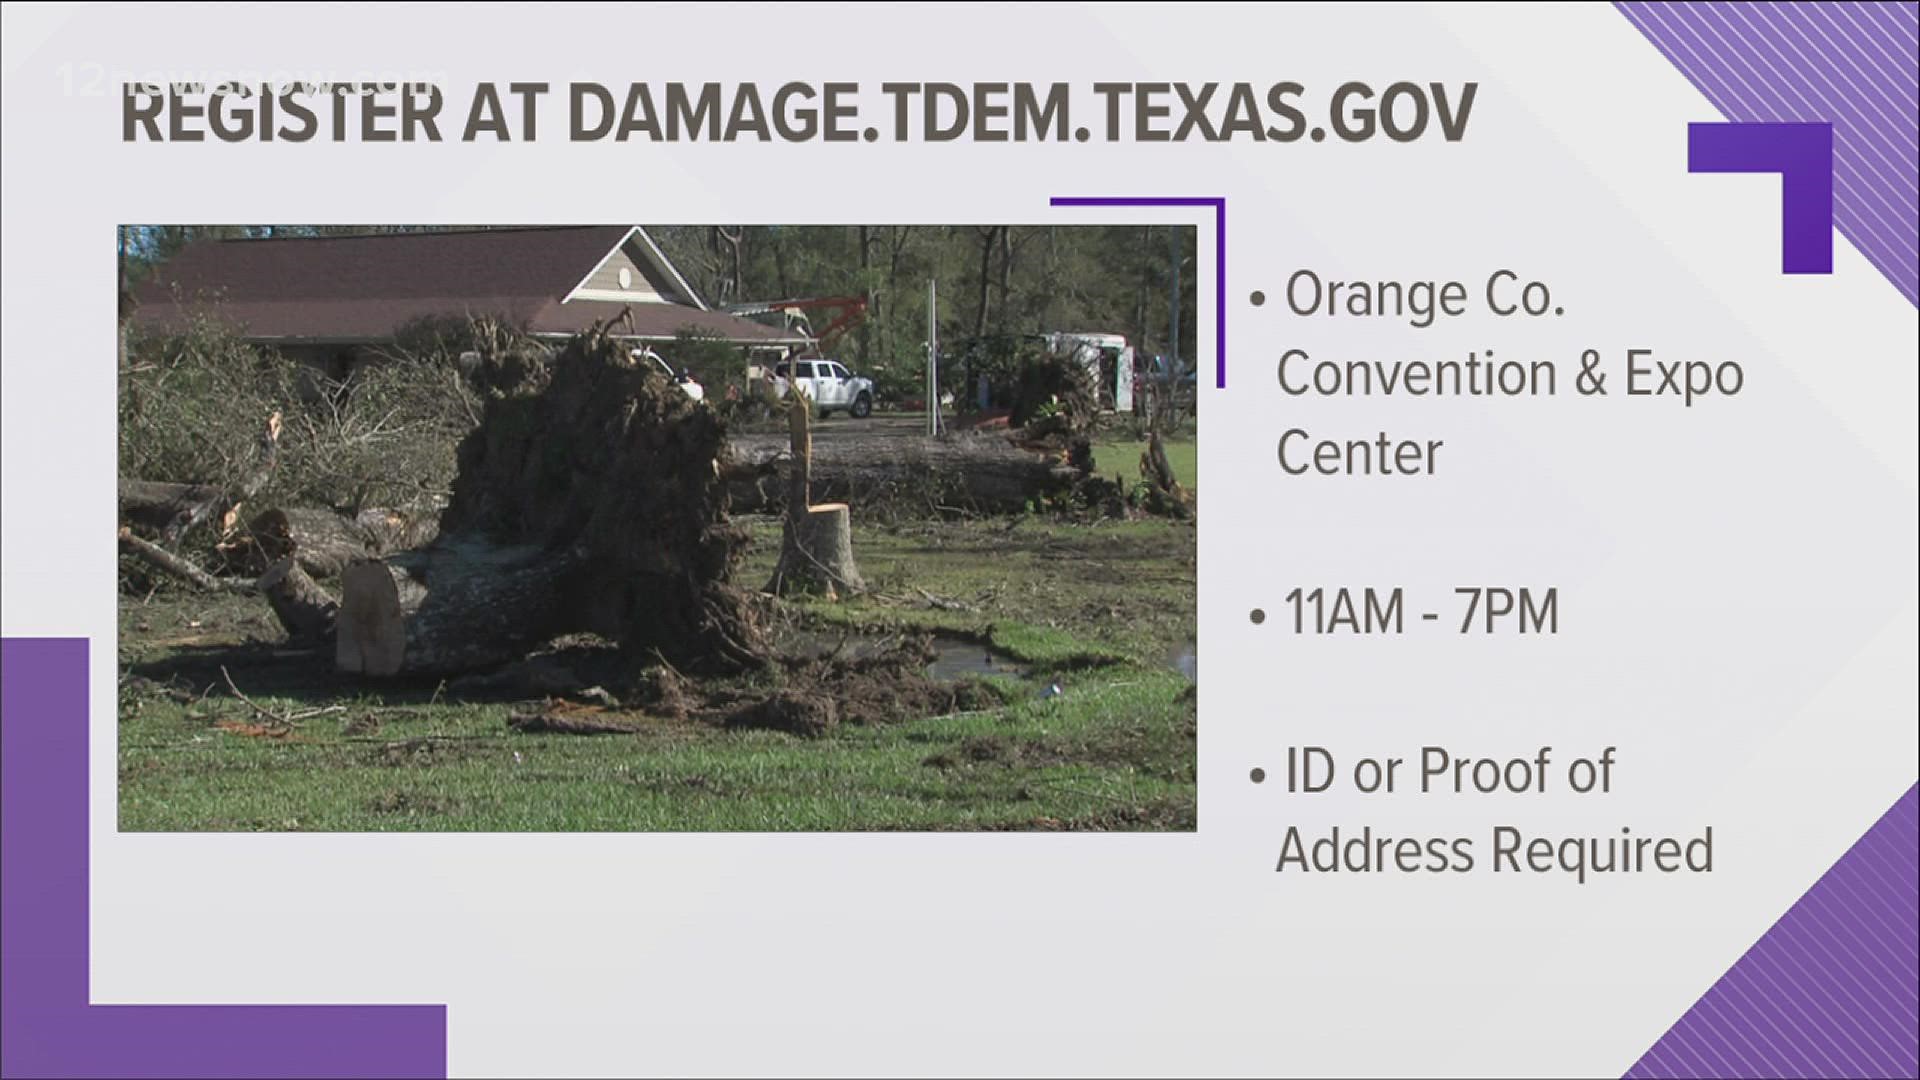 The event is happening Monday from 11 a.m. until 7 p.m. You must report damage online and register ahead of time.